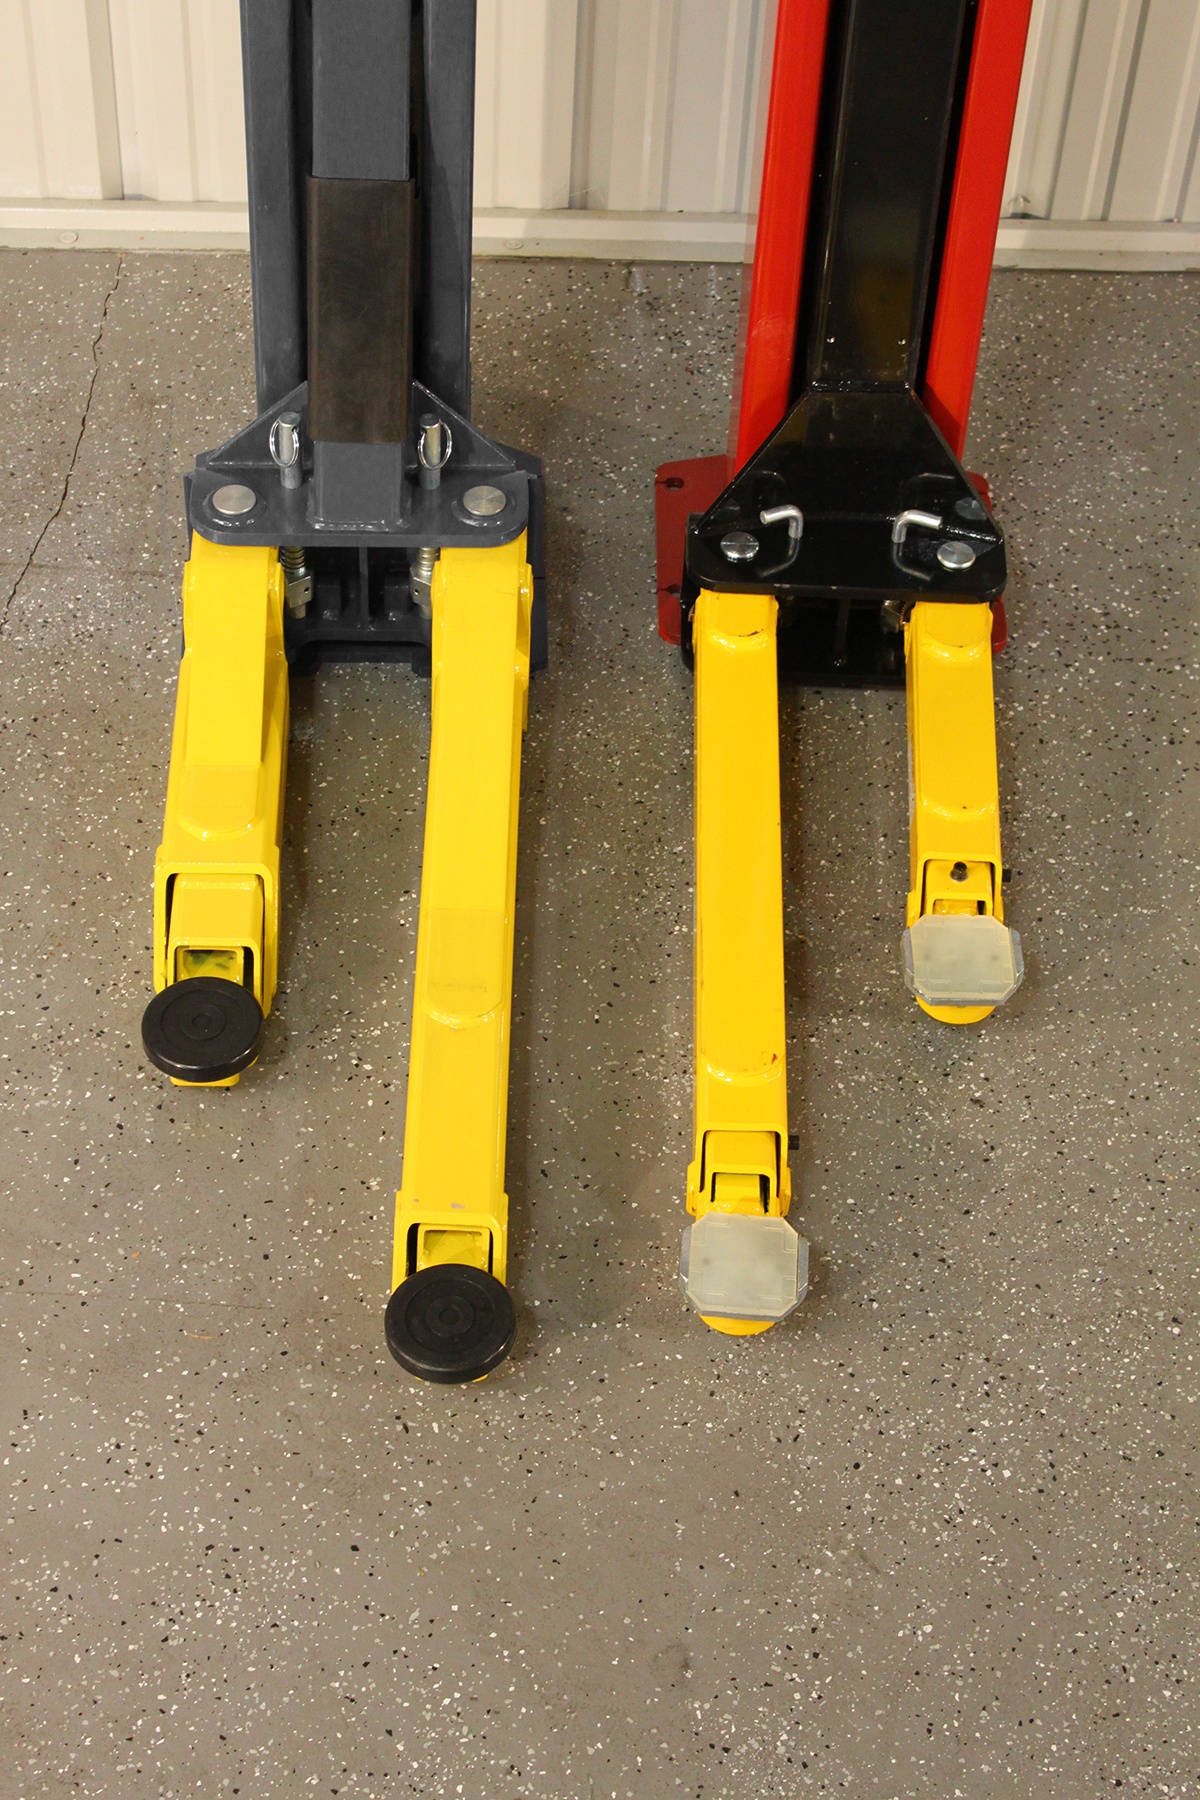 BendPak Two-Post lift Compared to Challenger Lift Arms Retracted